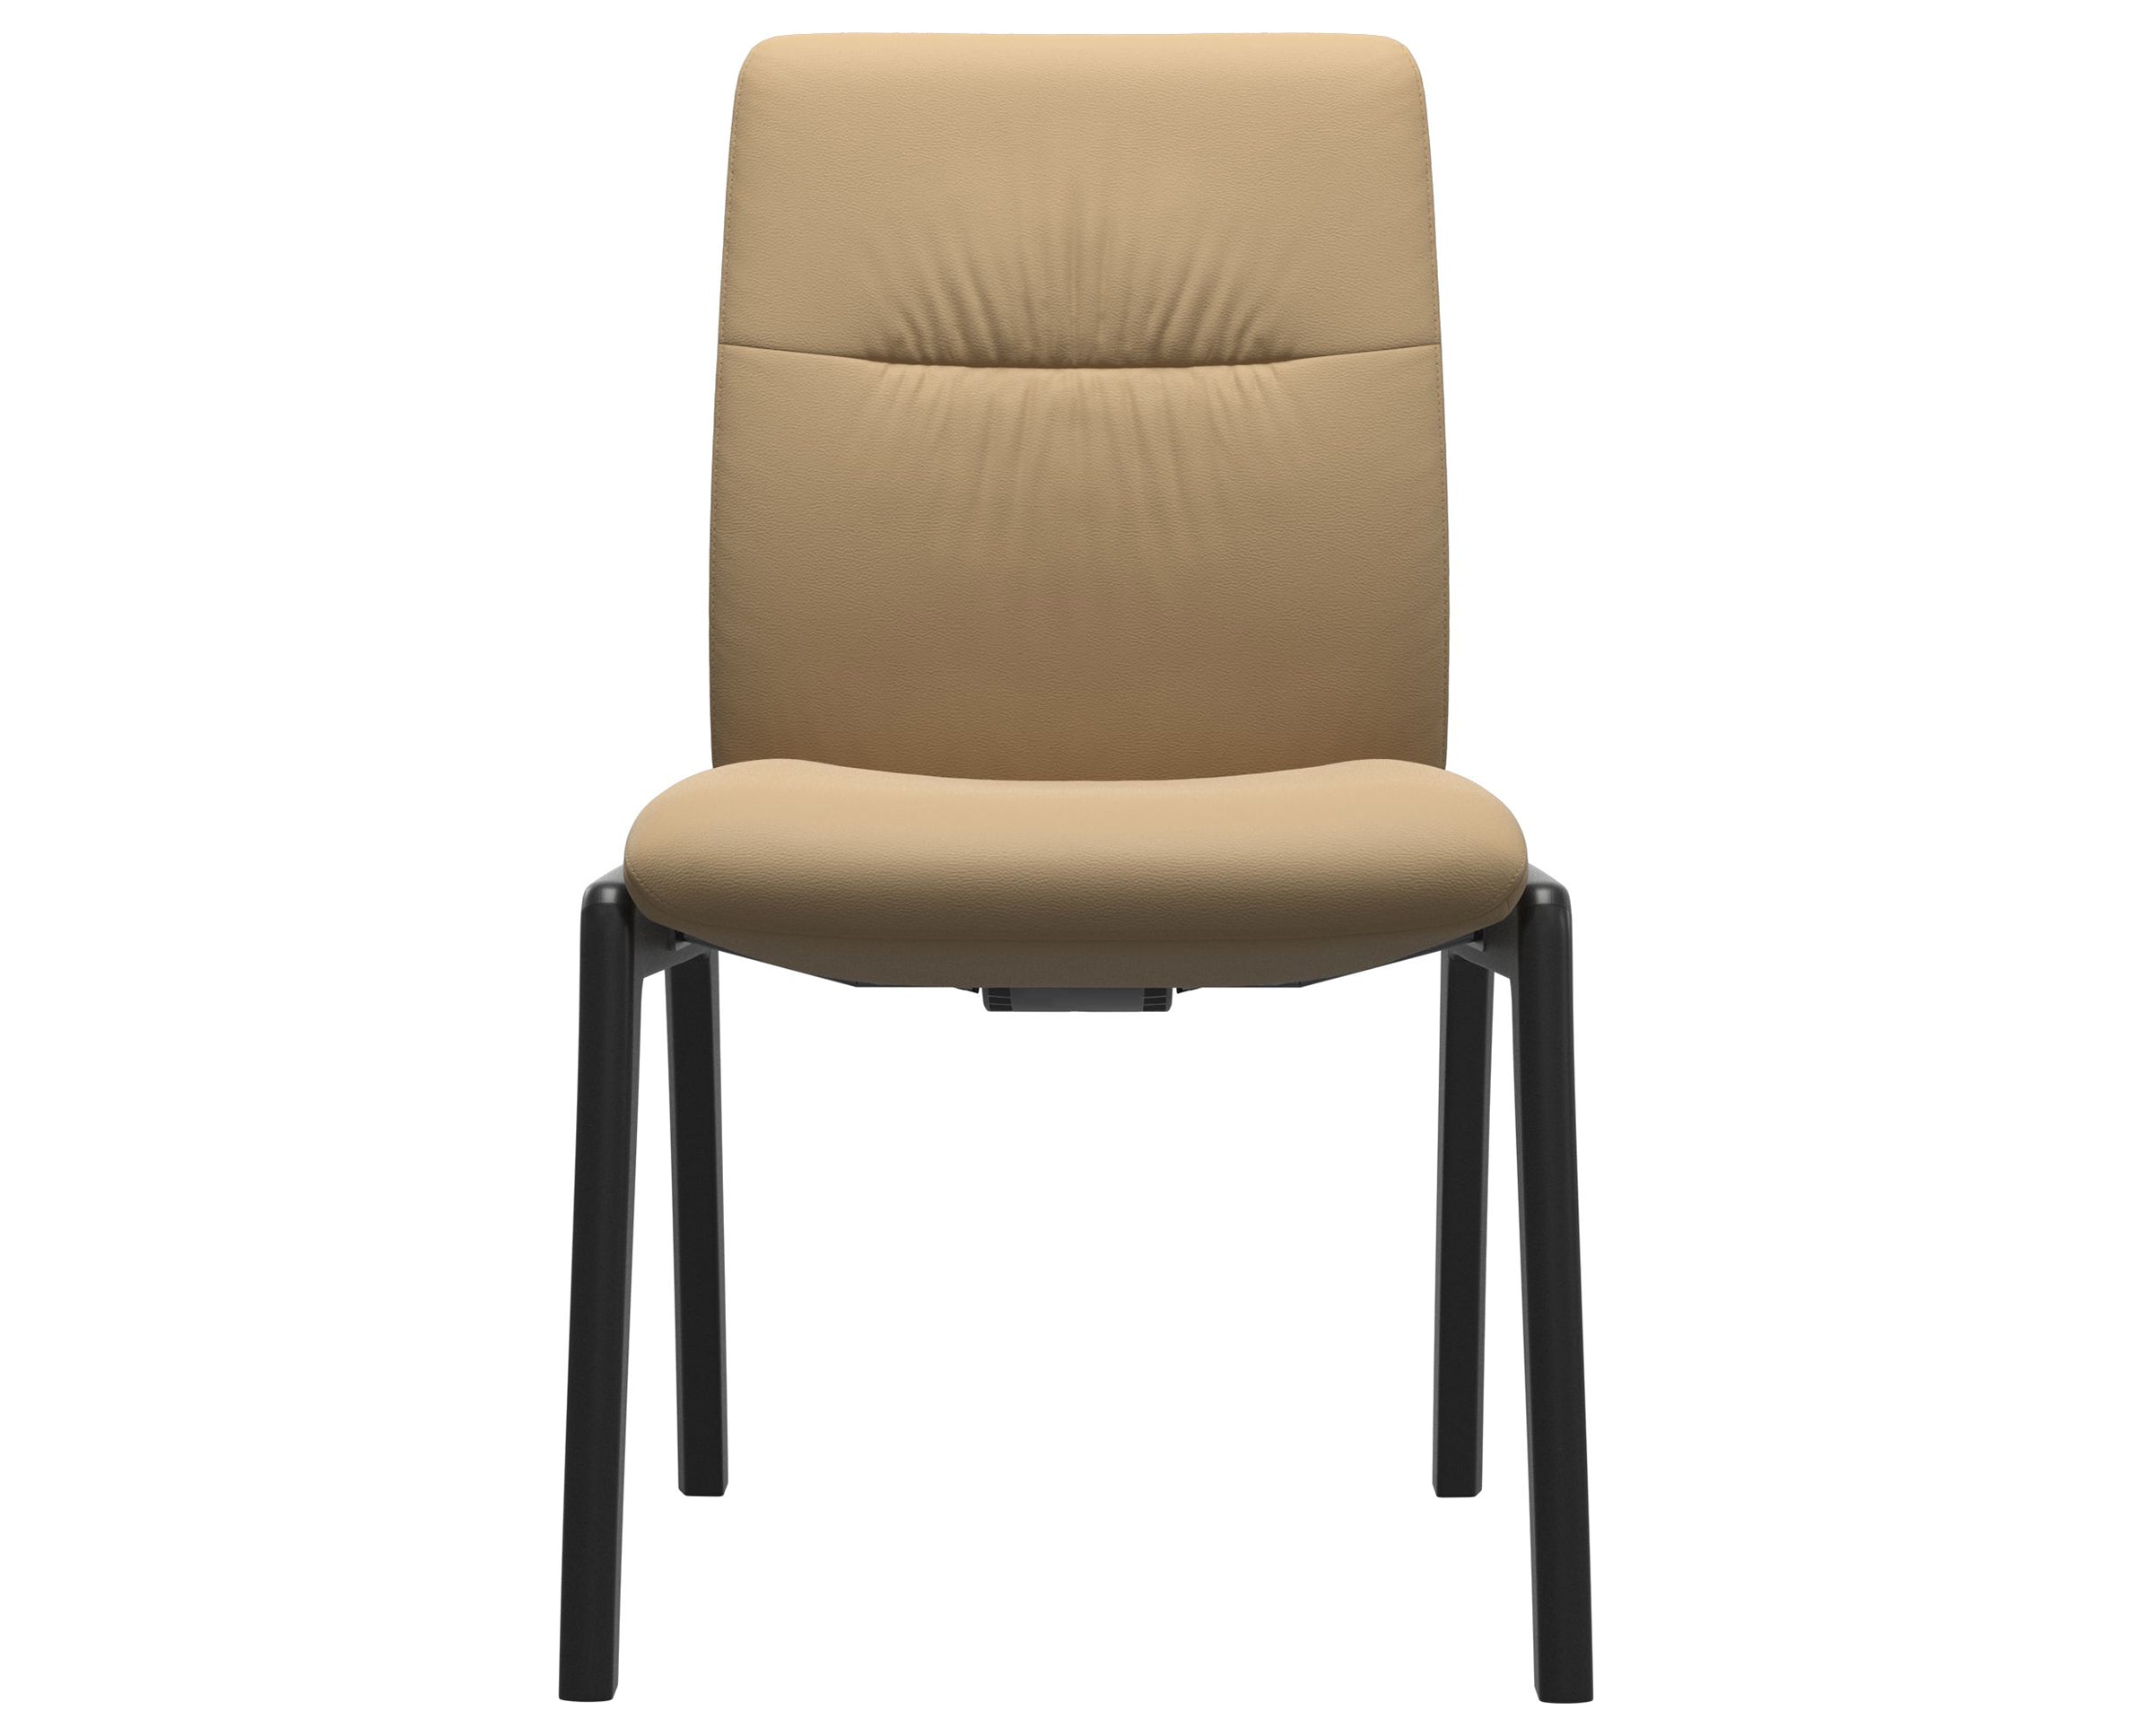 Paloma Leather Sand and Black Base | Stressless Mint Low Back D100 Dining Chair | Valley Ridge Furniture